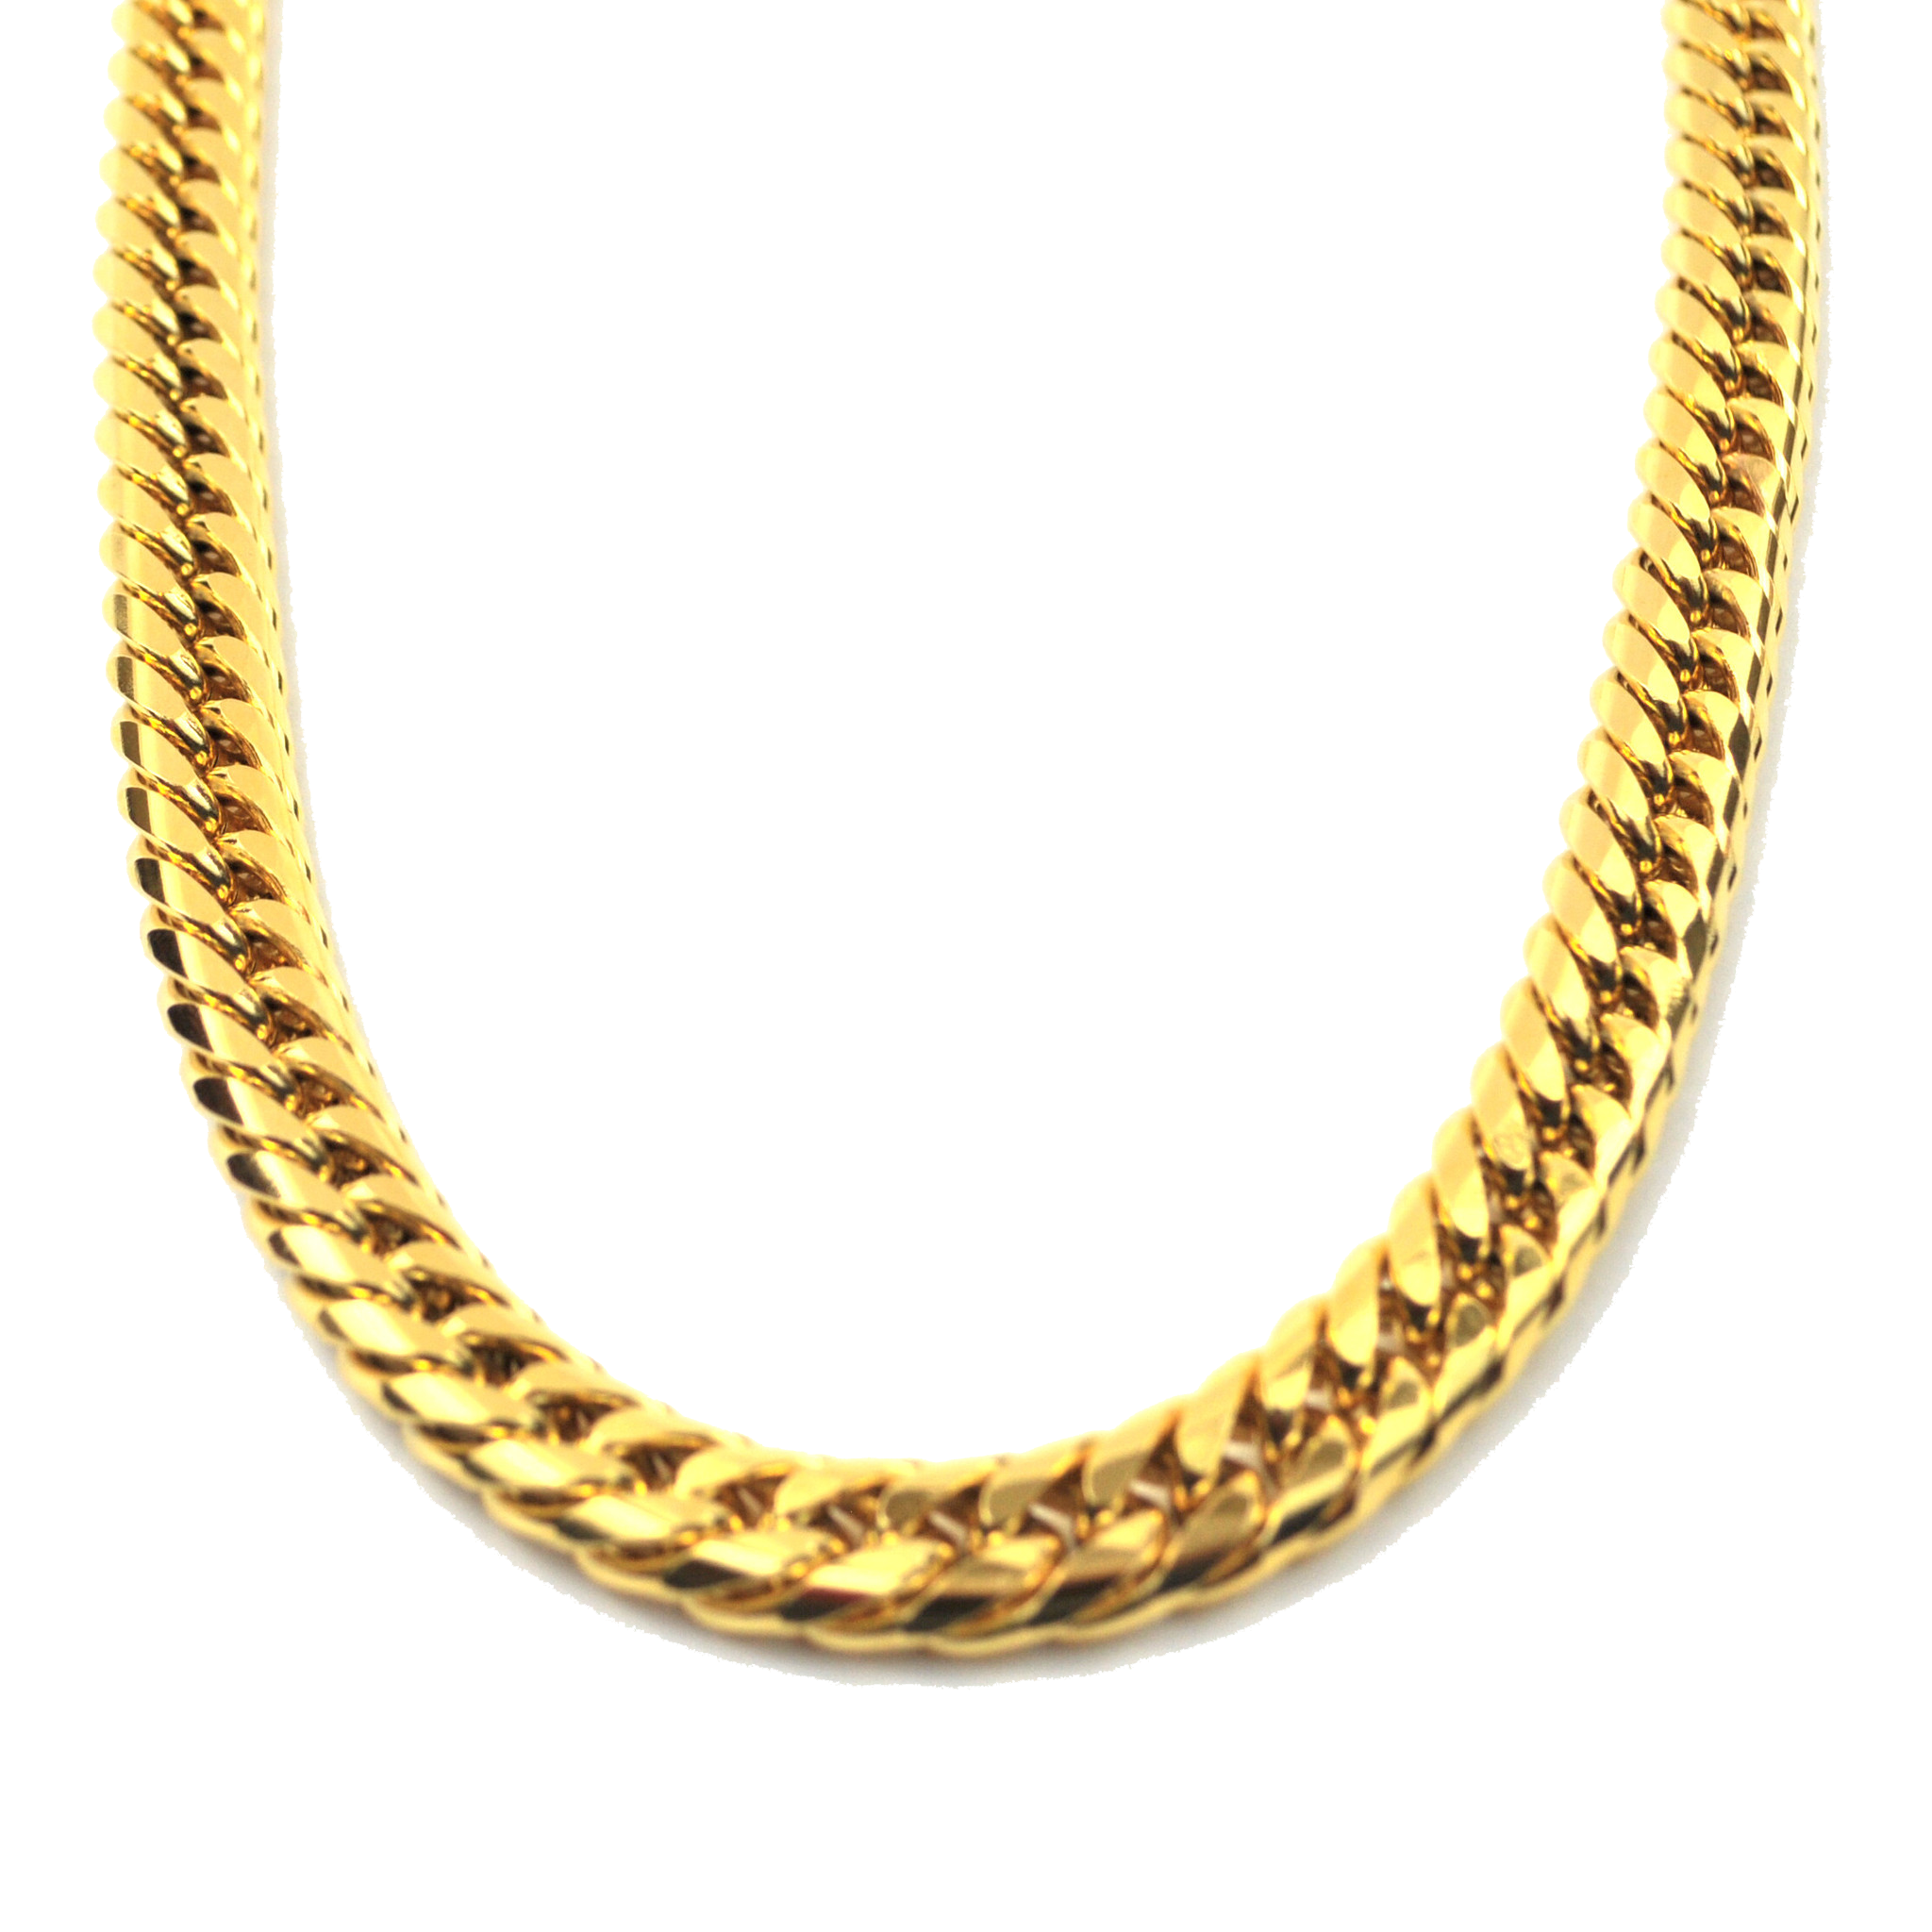 Gold Chain Png For Photoshop Also Explore Similar Png Transparent Images